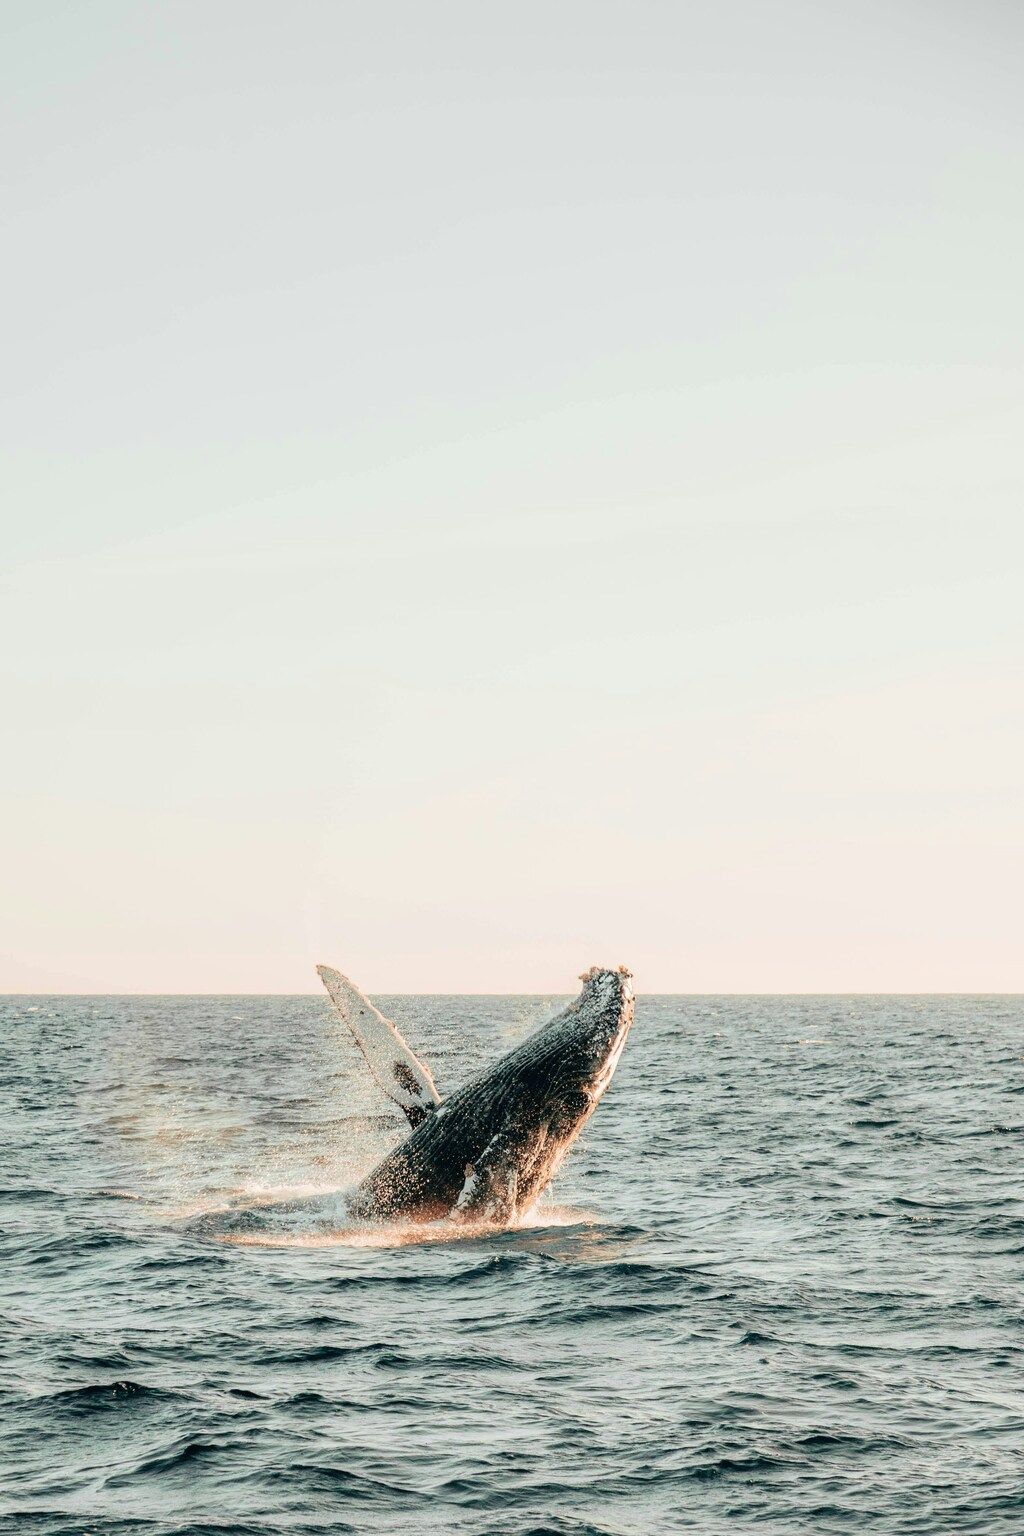 A humpback whale breaching the ocean surface during sunset in Costa Rica